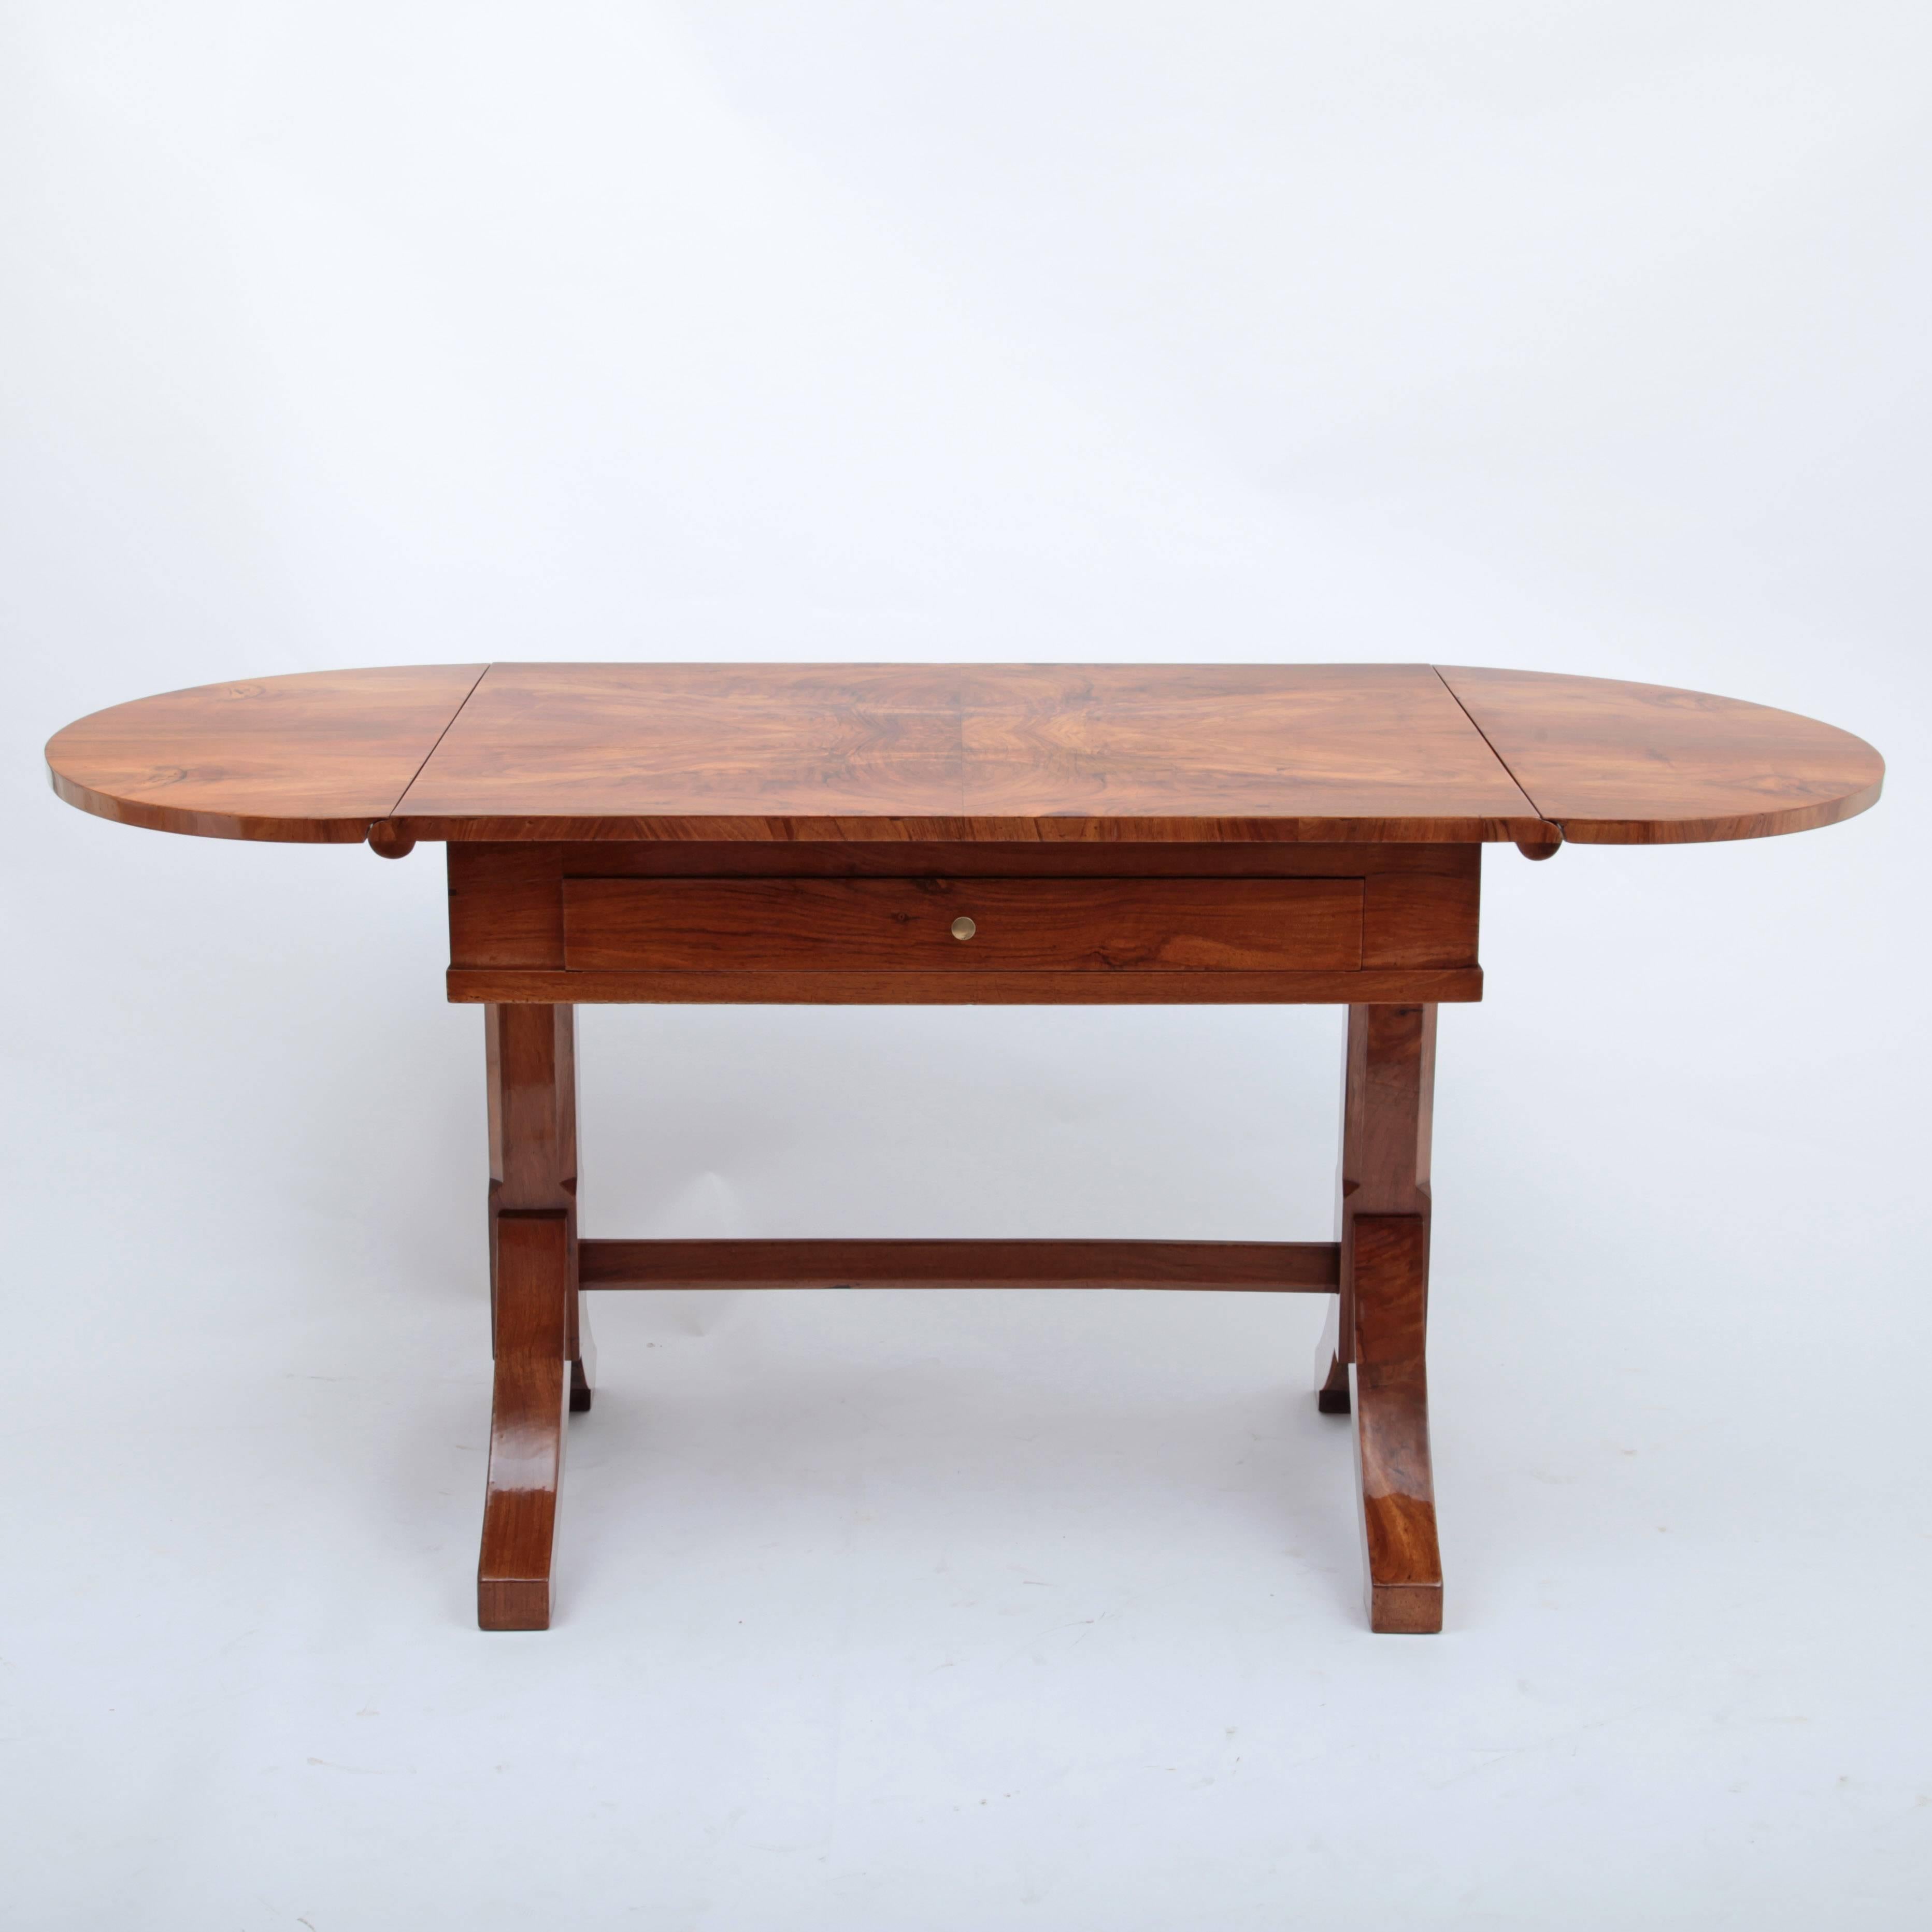 Biedermeier table with one drawer and foldable, rounded tabletop. The table has a beautiful veneer pattern.